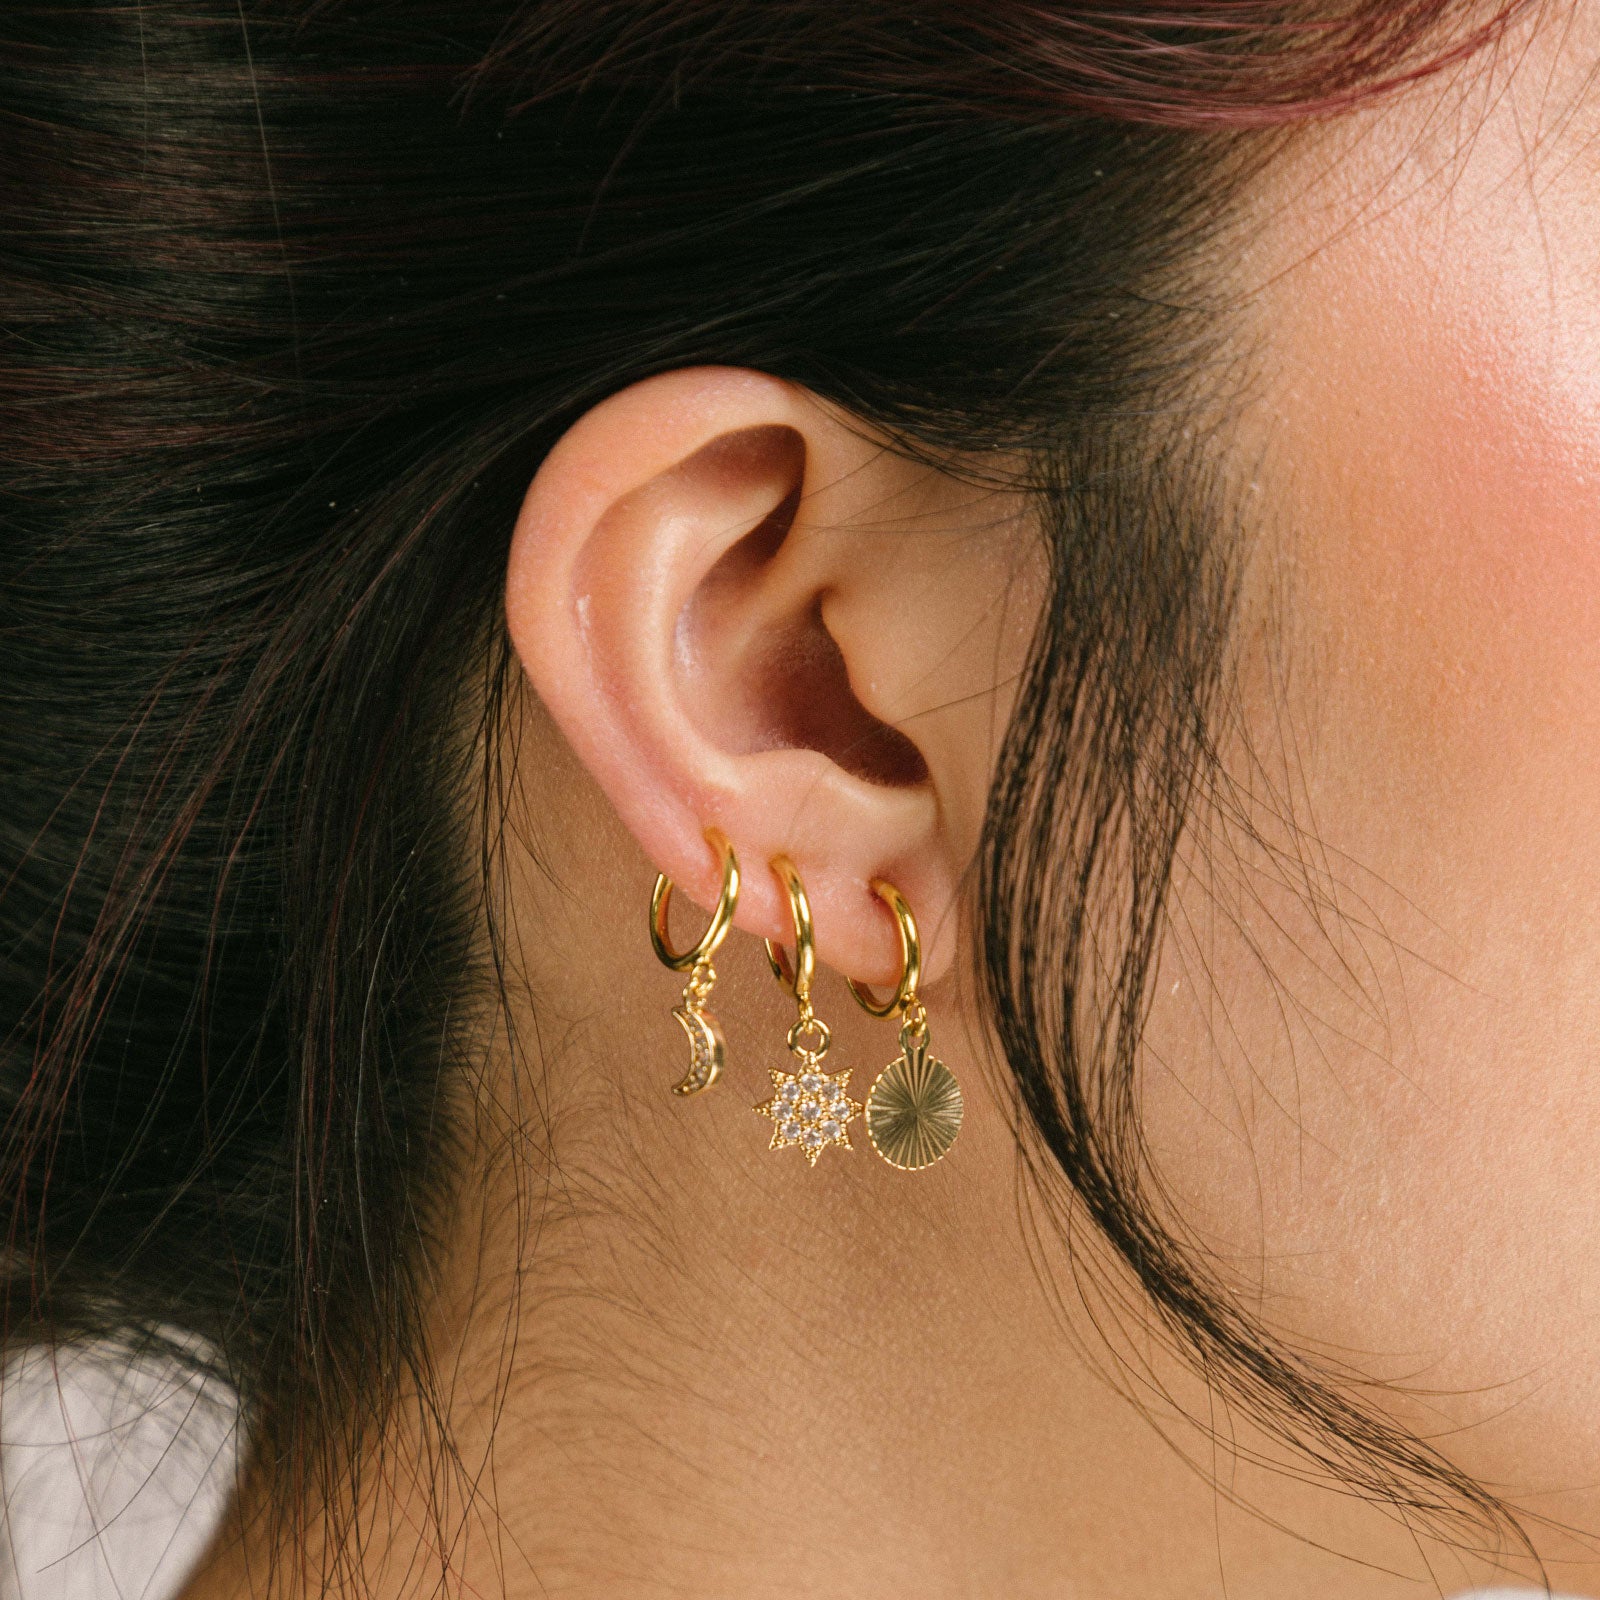 A model wearing Celestial Earrings Stack Set, particularly suited to those with delicate or slender earlobes. Expertly crafted from brass and punctuated with glimmering cubic zirconias, this set features the Sunbeam Clip On Earrings, Star Charm Clip On Earrings, and Moon Charm Clip On Earrings.